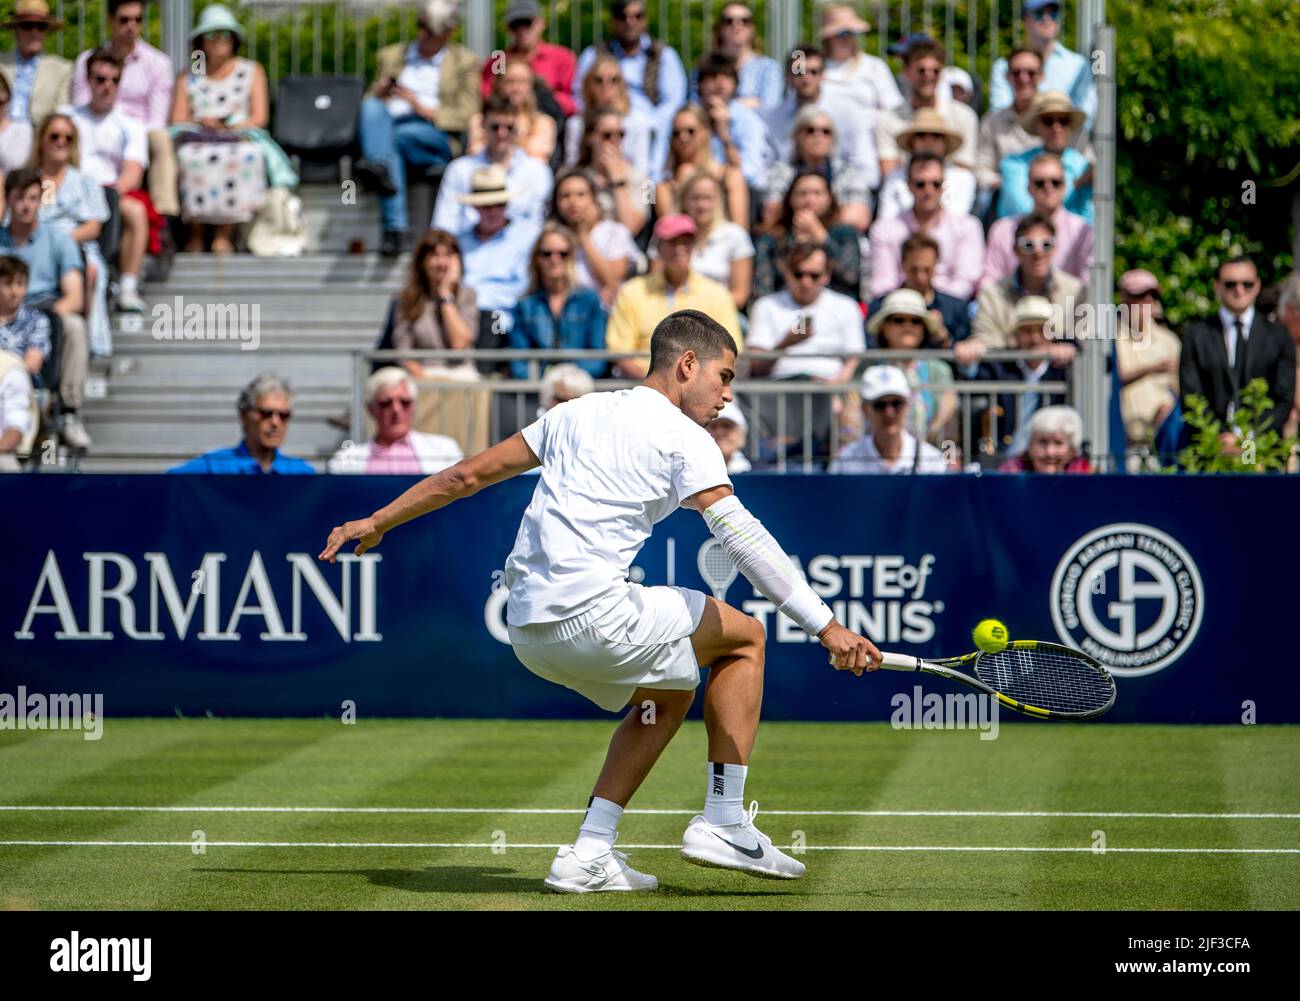 London, UK. 25th June, 2022. Carlos Alcaraz plays closes in on the net  during the Giorgio Armani Tennis Classic at the Hurlingham Club, London, UK  on 25 June 2022. Photo by Phil